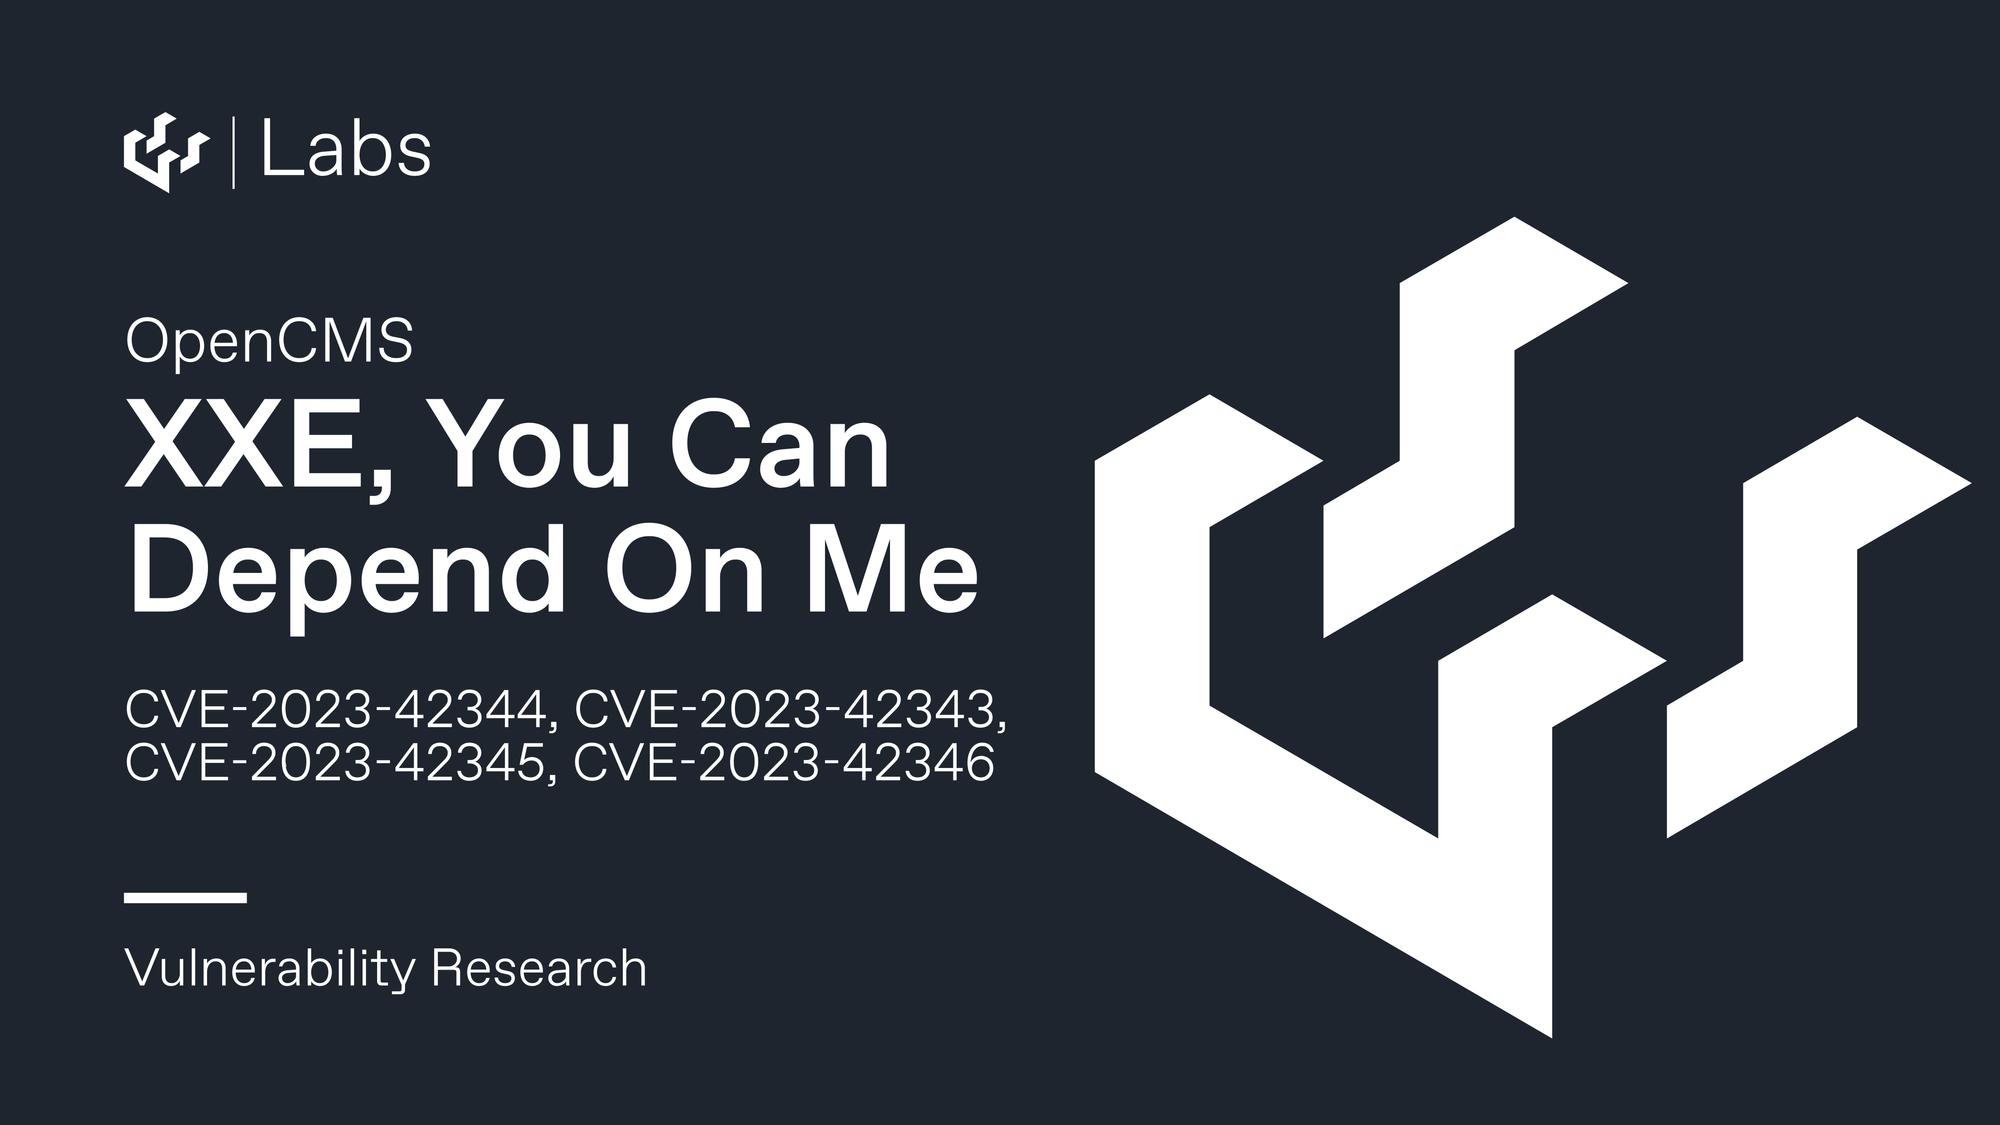 XXE, You Can Depend On Me (OpenCMS CVE-2023-42344 and Friends)